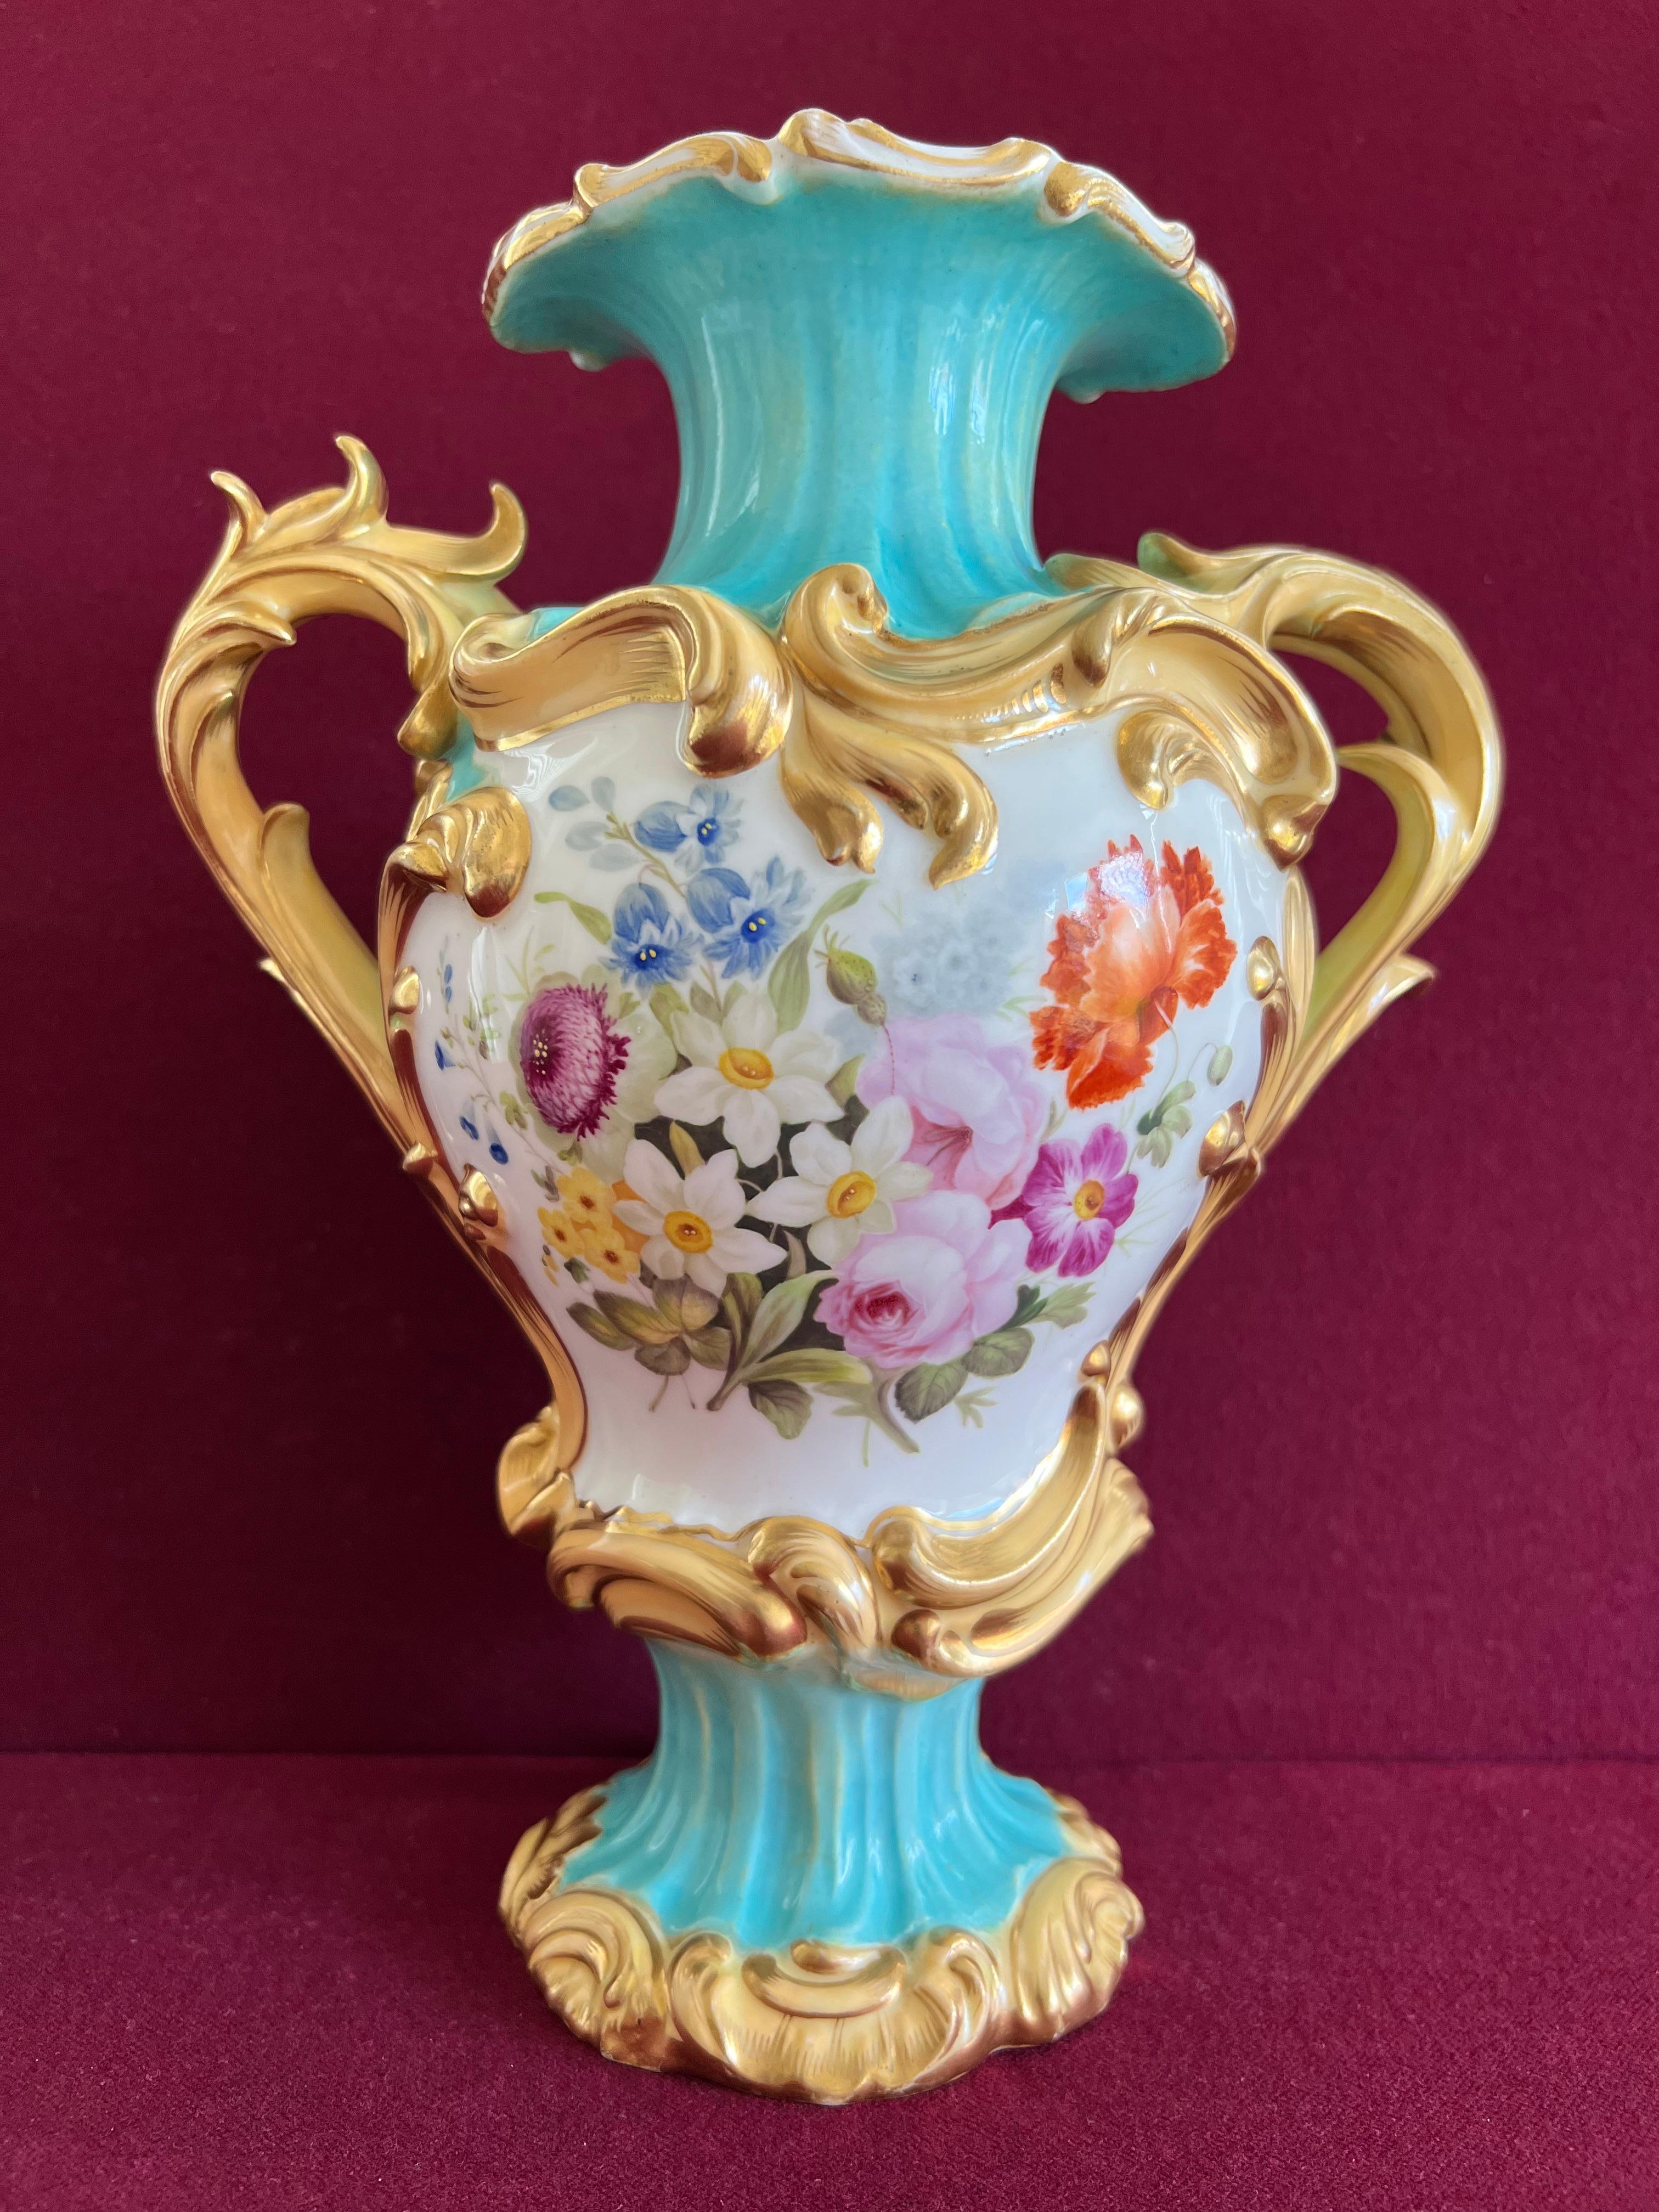 A fine Minton porcelain 'Dresden Antique Vase' c.1835-1840. Of rococo inspired form, designated as ornamental design number 74 'Dresden Antique Vase' in the Minton Factory design book. Turquoise coloured ground with moulded scrolling panels and